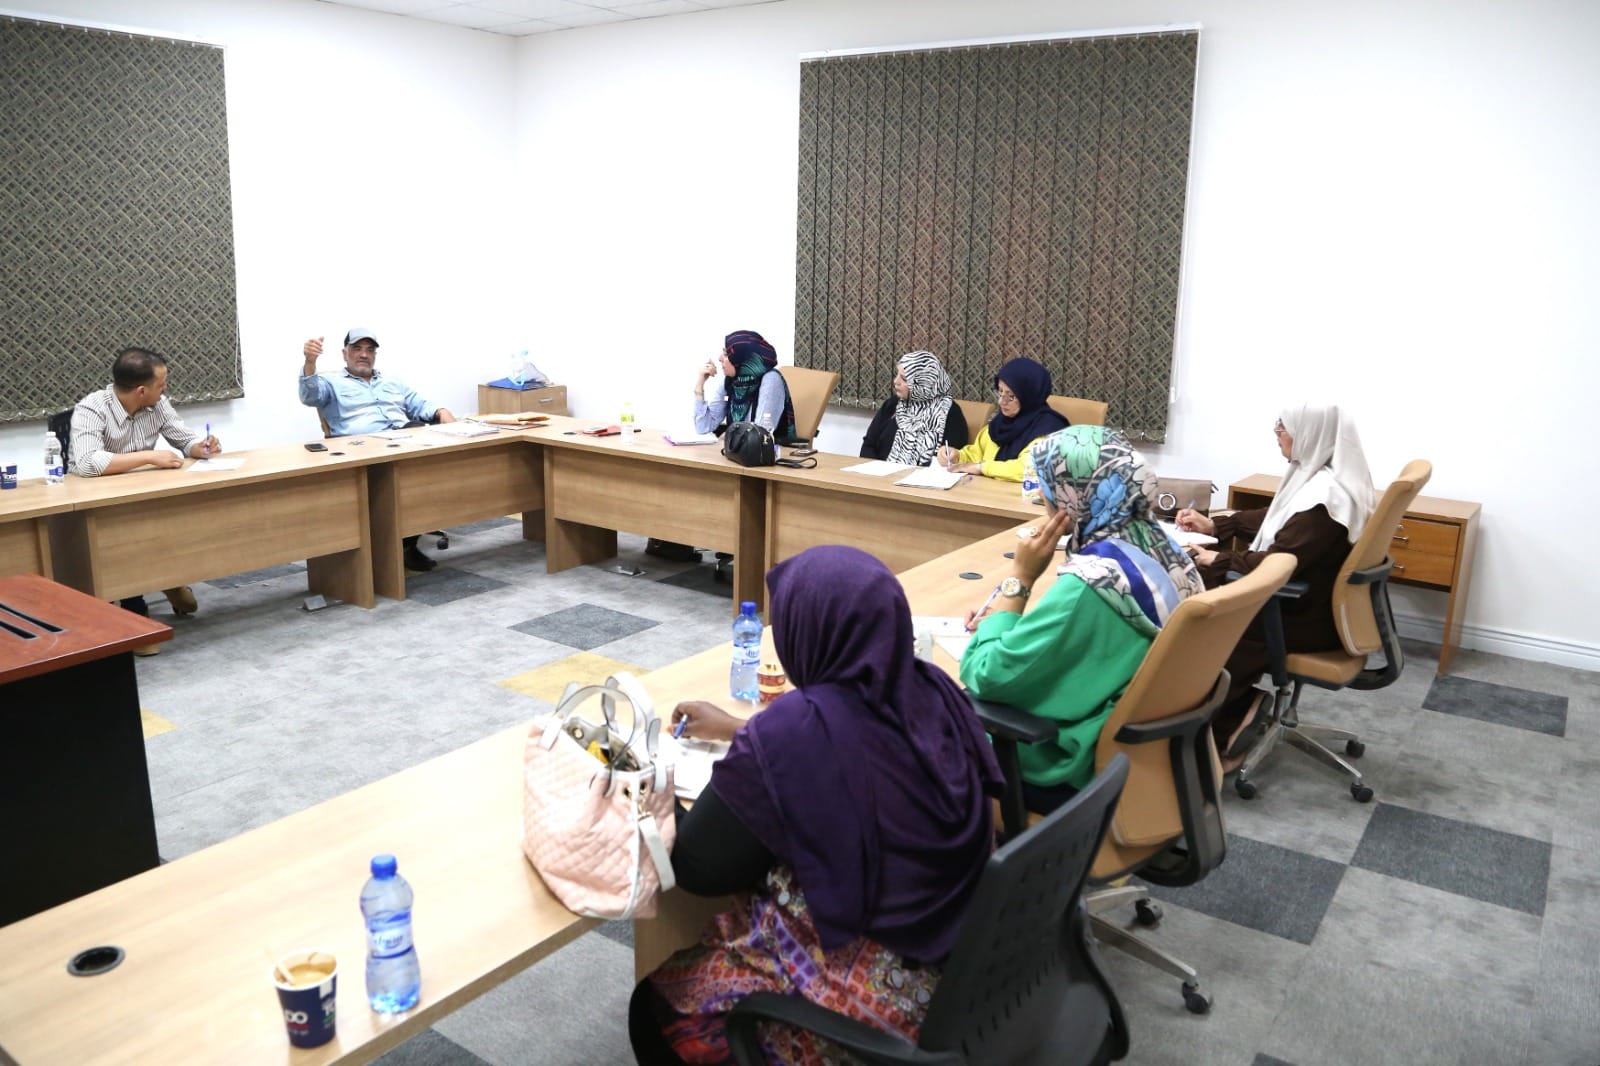 Course on the arts of writing a press report kicked off yesterday at LANA training center.